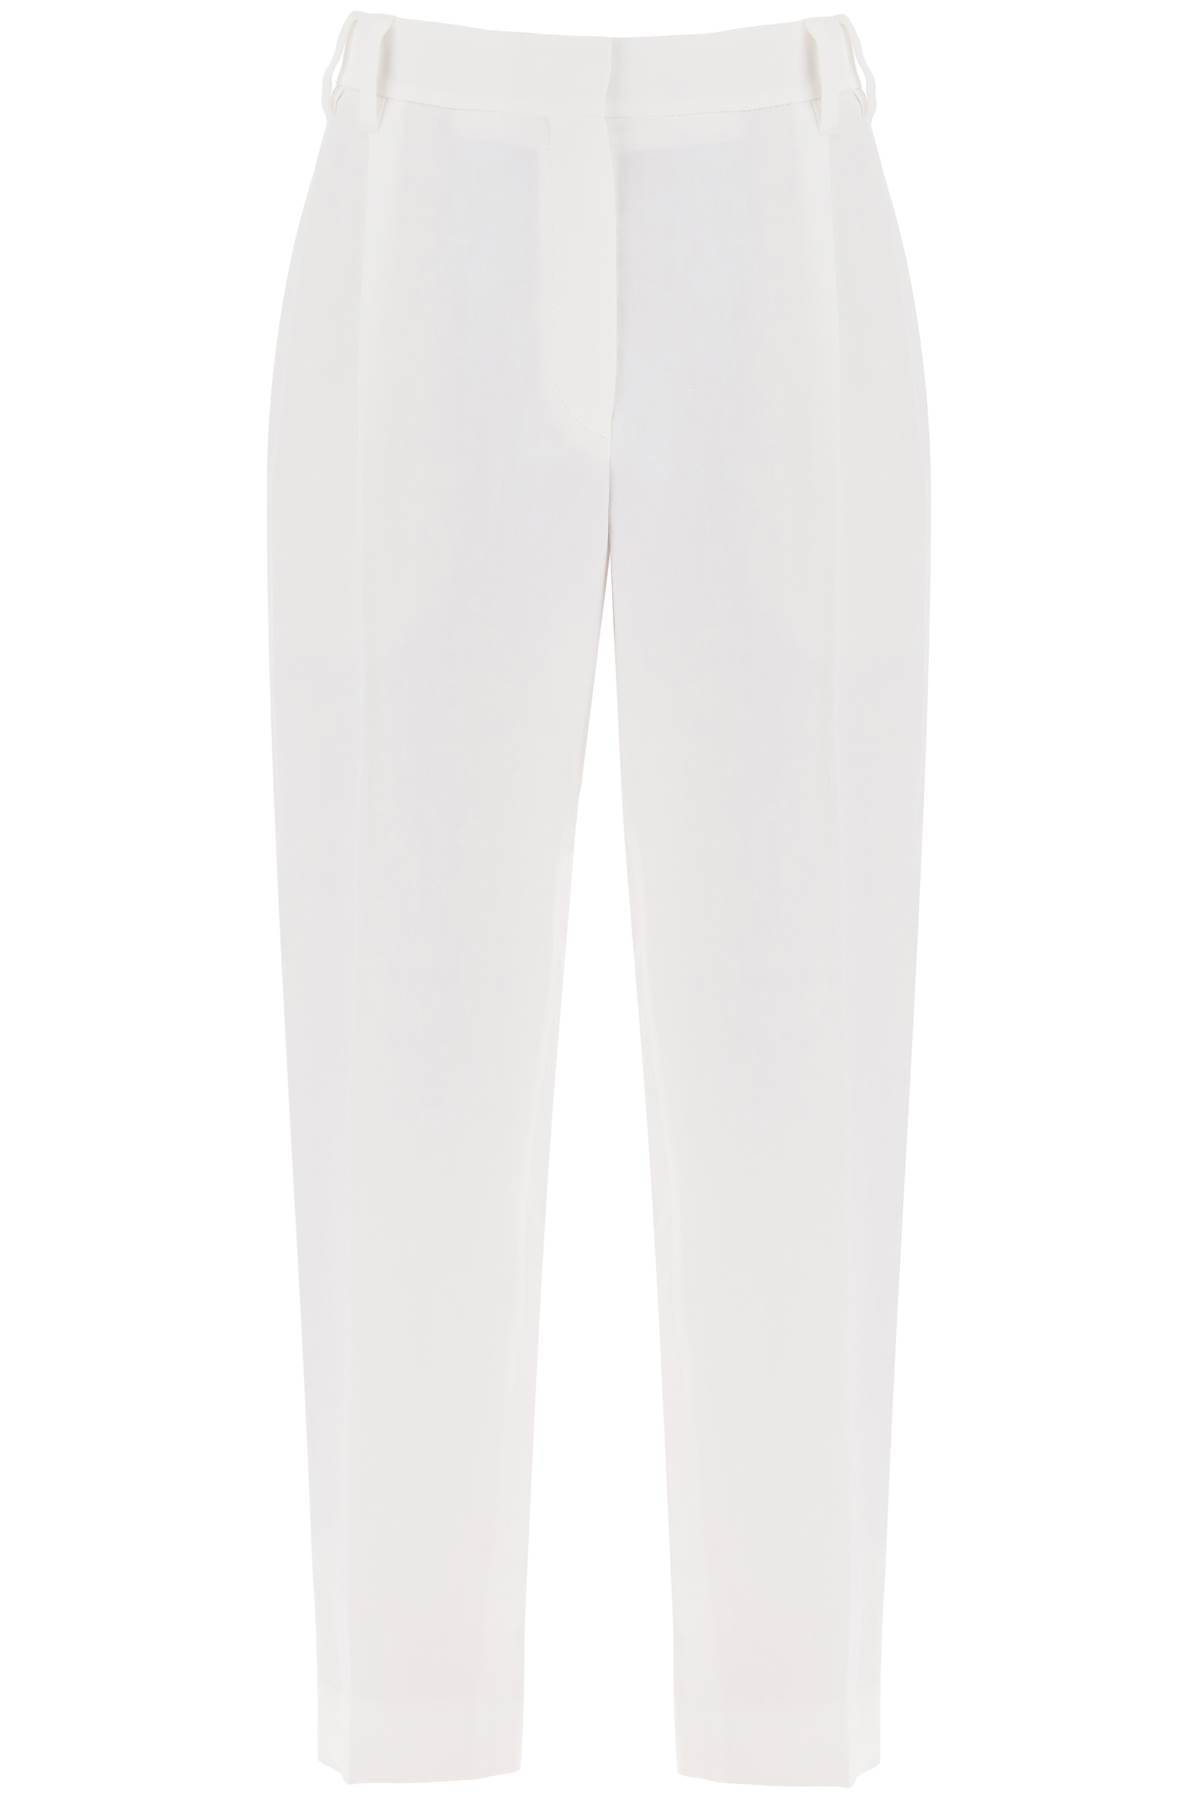 BRUNELLO CUCINELLI DOUBLE PLEATED TROUSERS